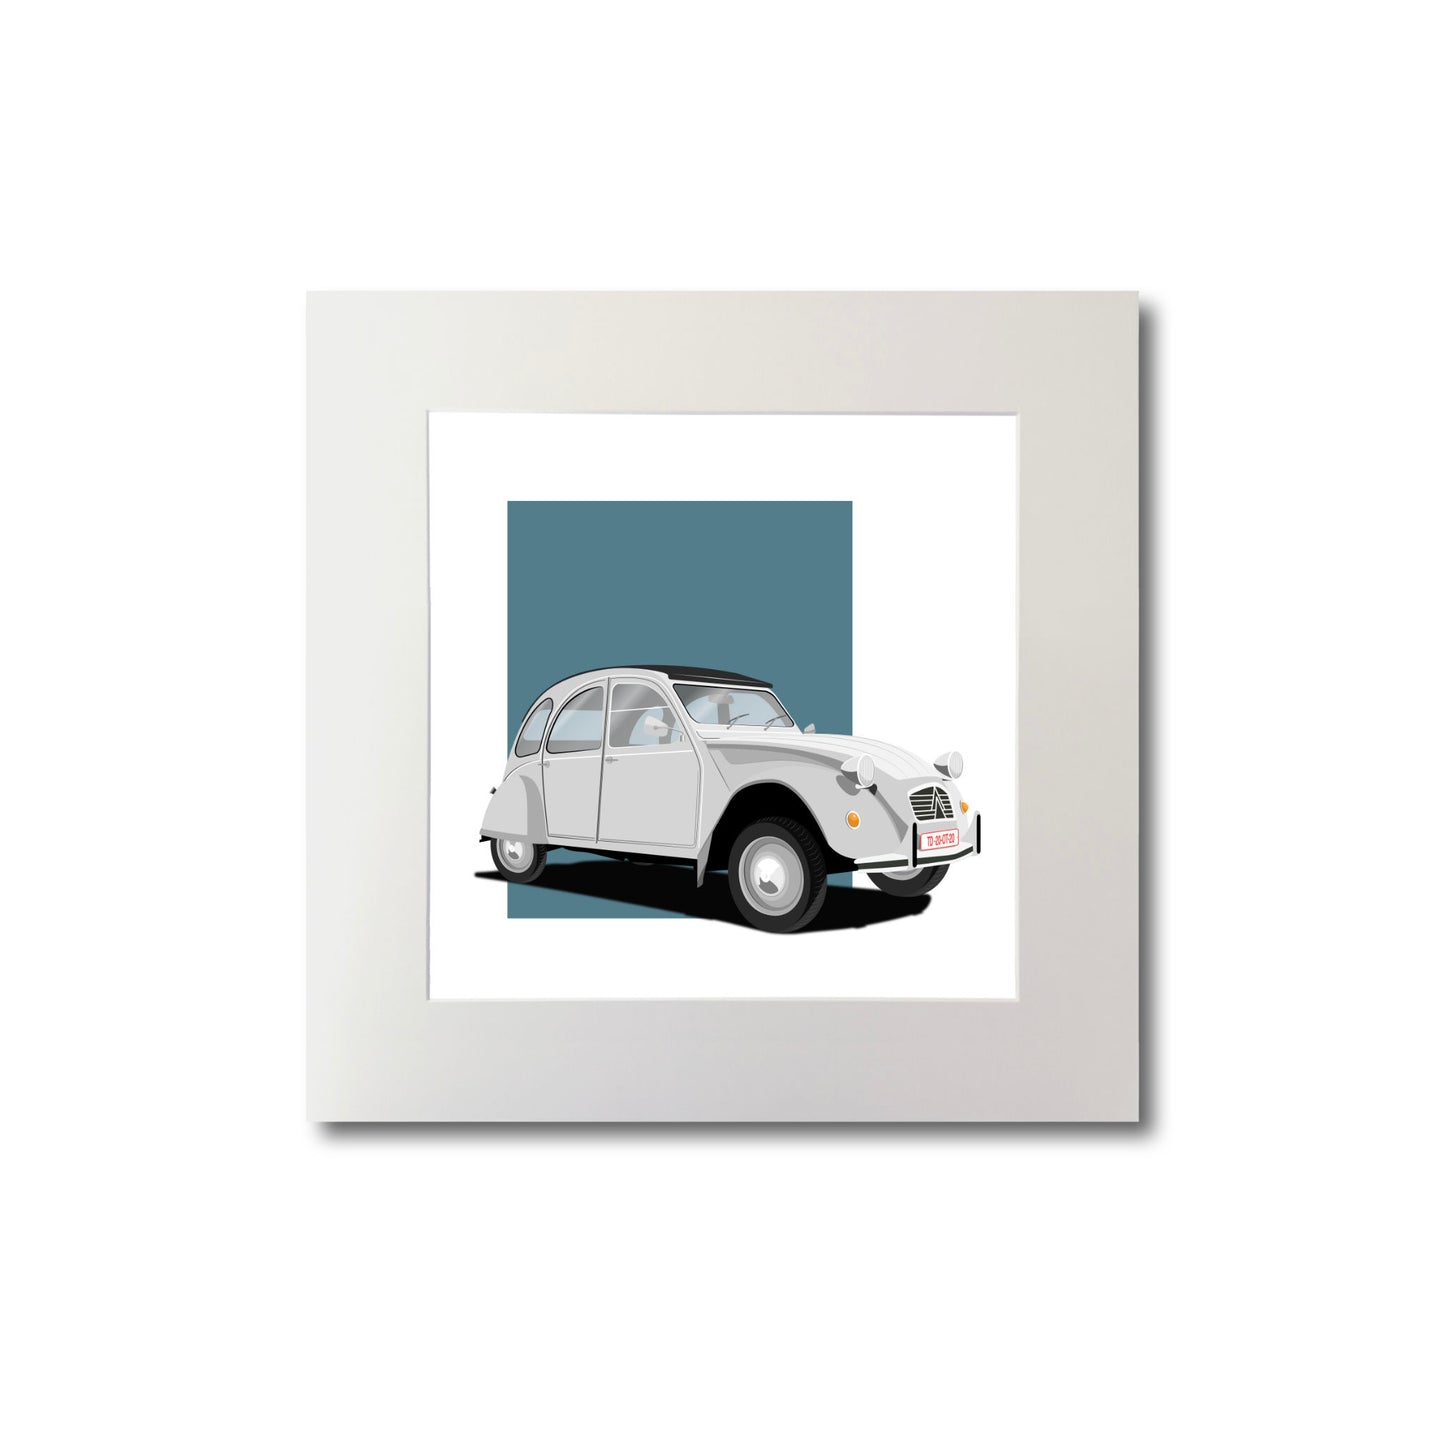 Illustration of a white Citroën 2CV, mounted and measuring 20 by 20 cm